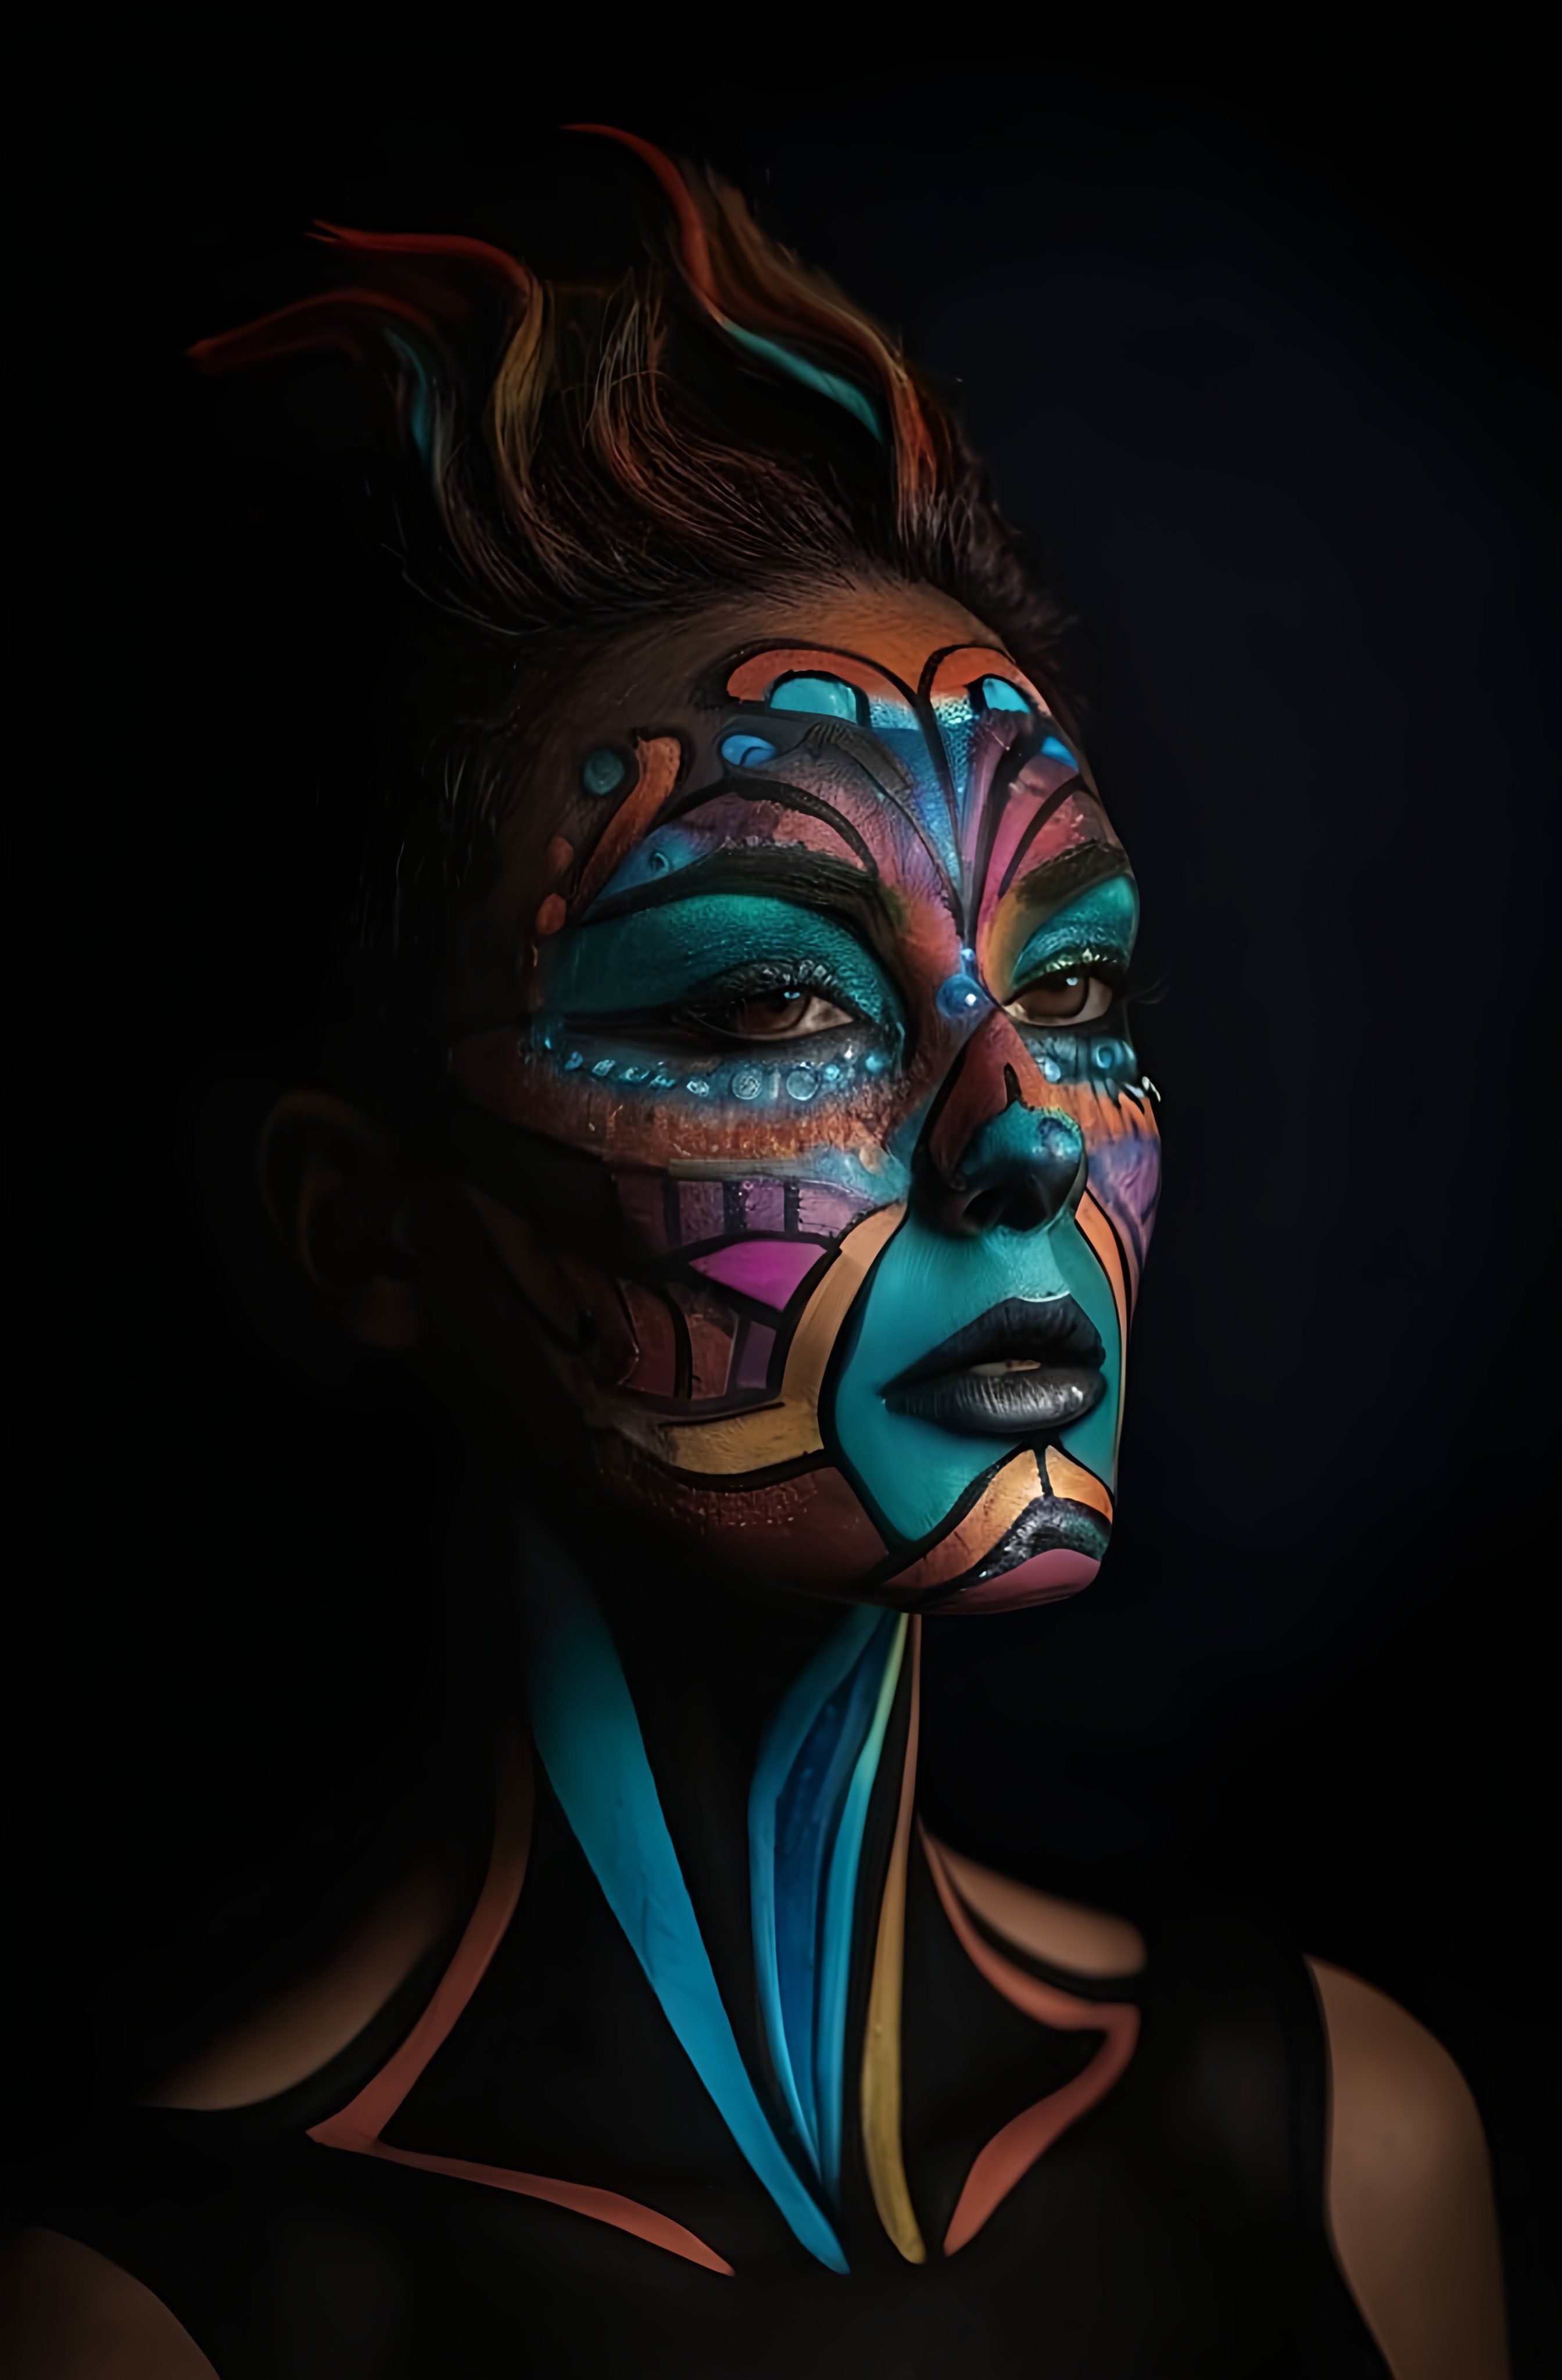 Prompt: a woman with face paint and a black background is shown in the image of a woman with colorful makeup, neo-fauvism, behance hd